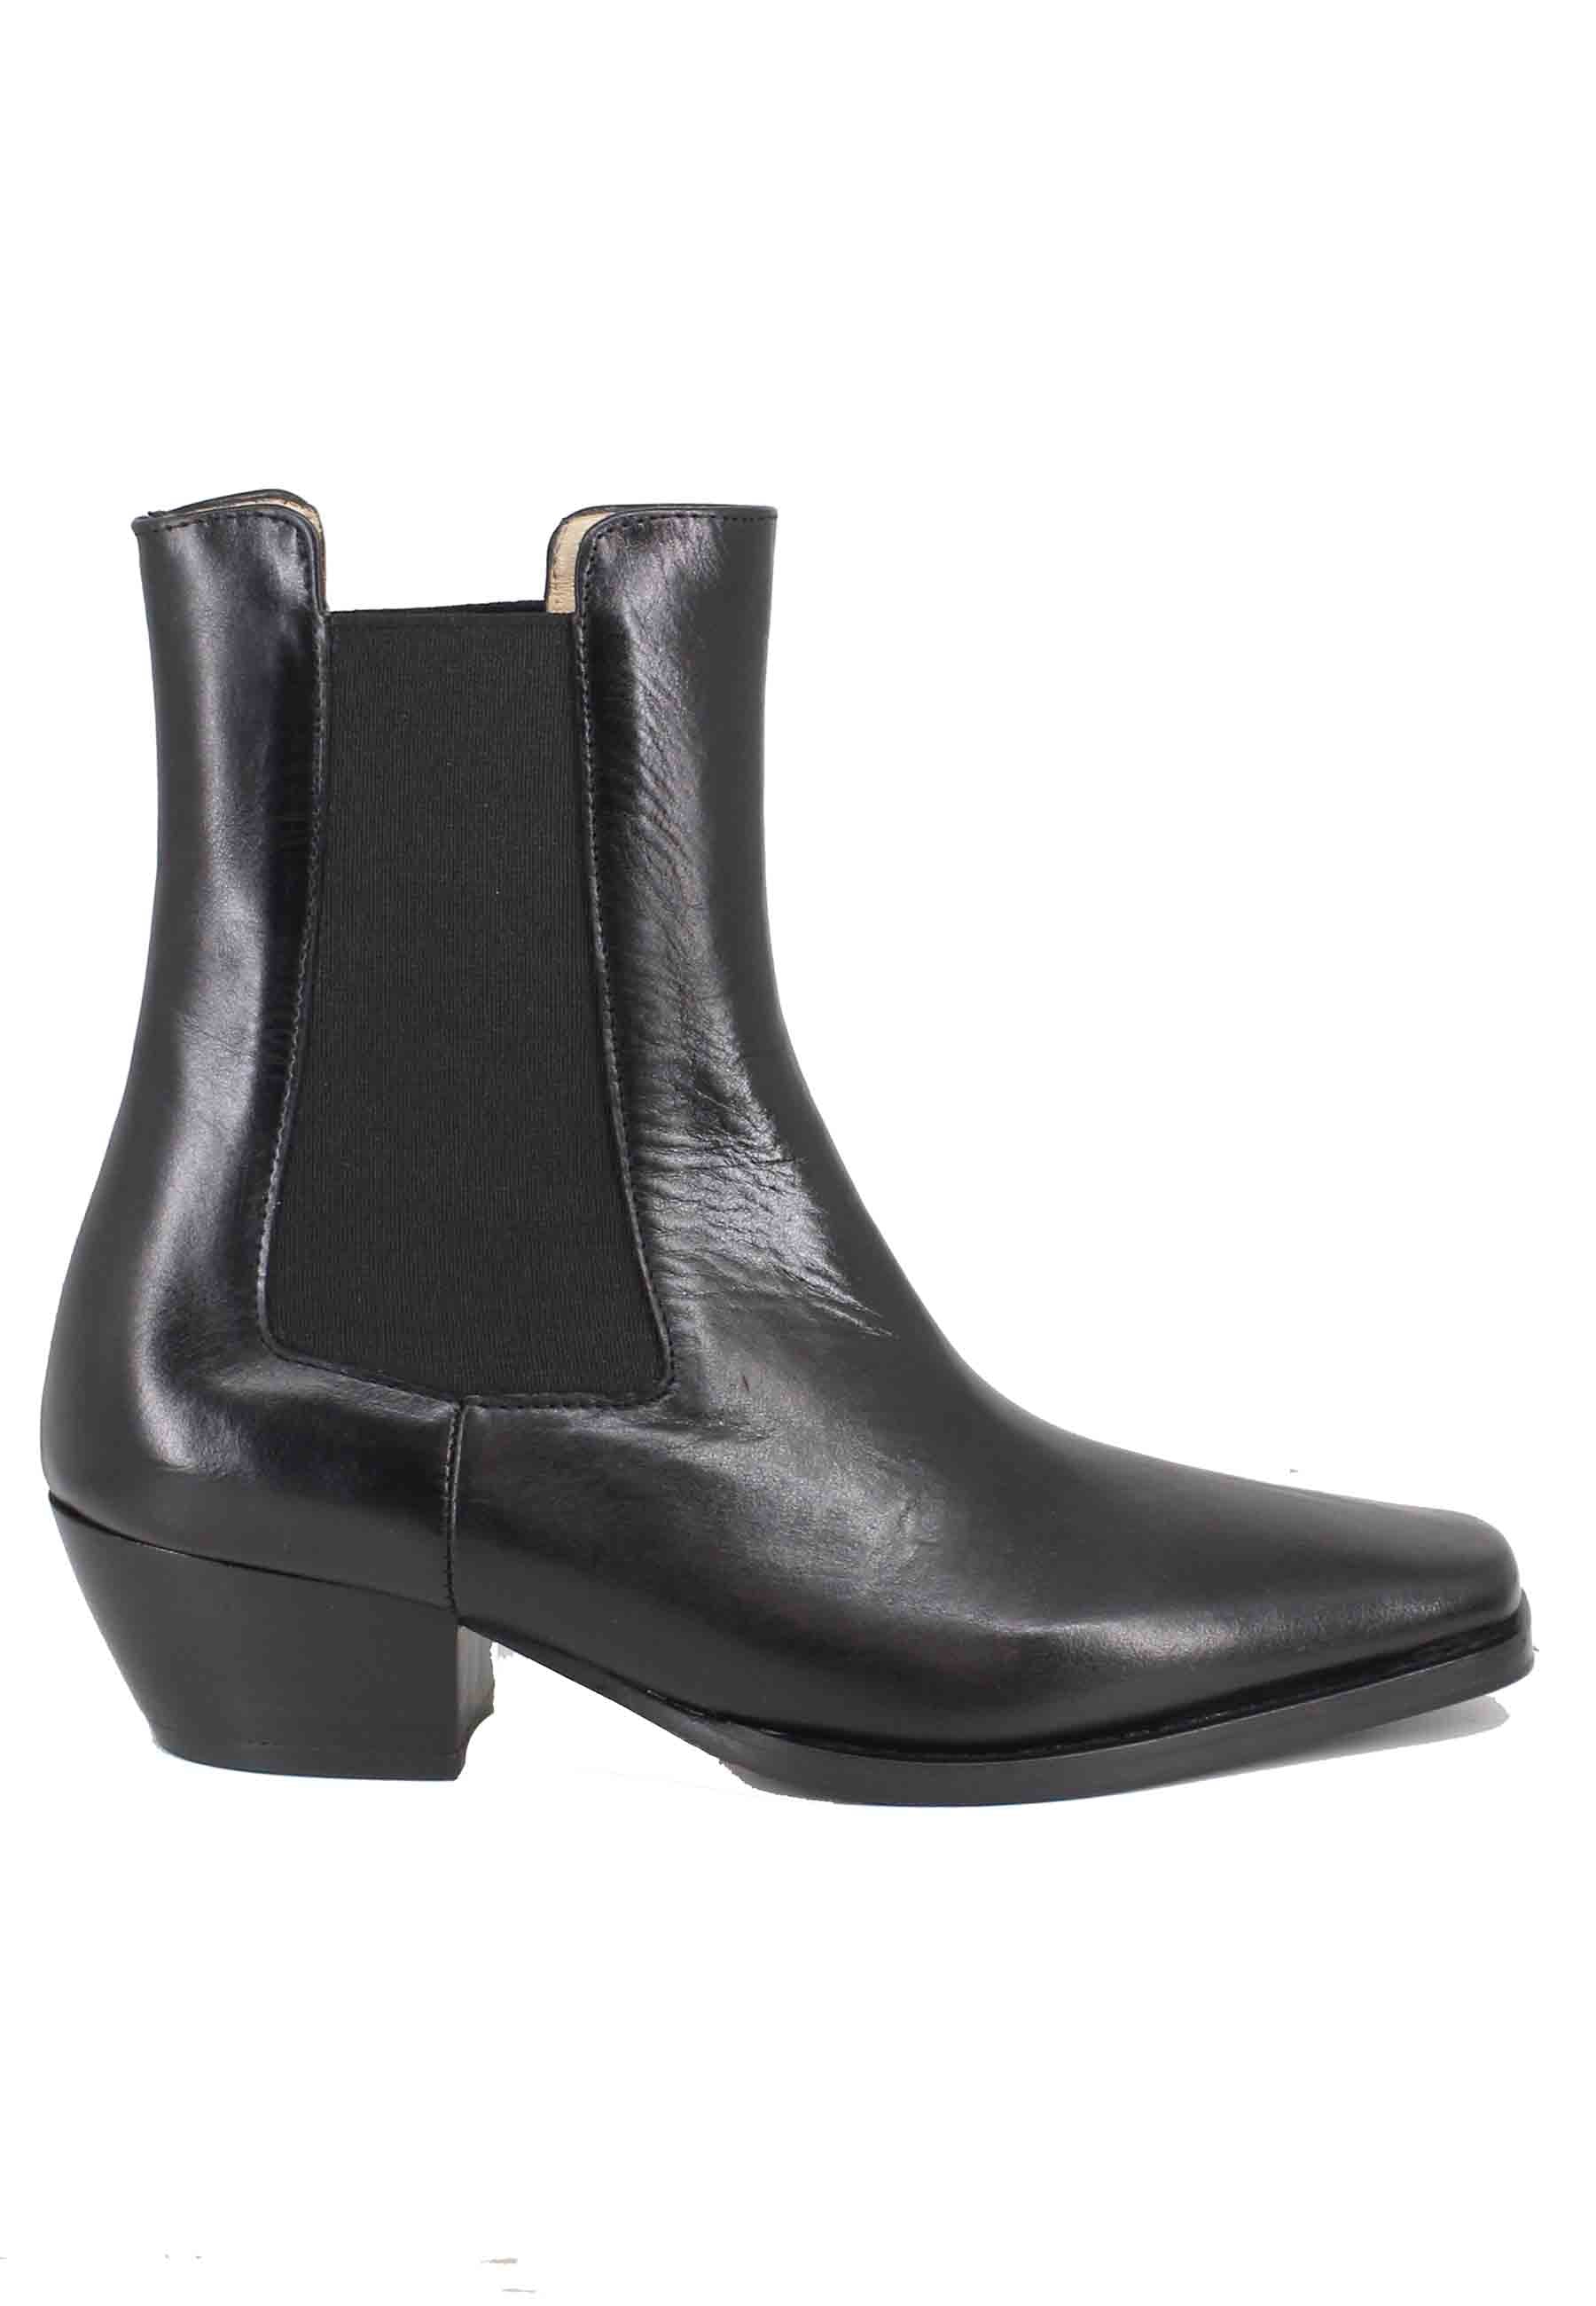 Women's chelsea boot in black leather with square toe